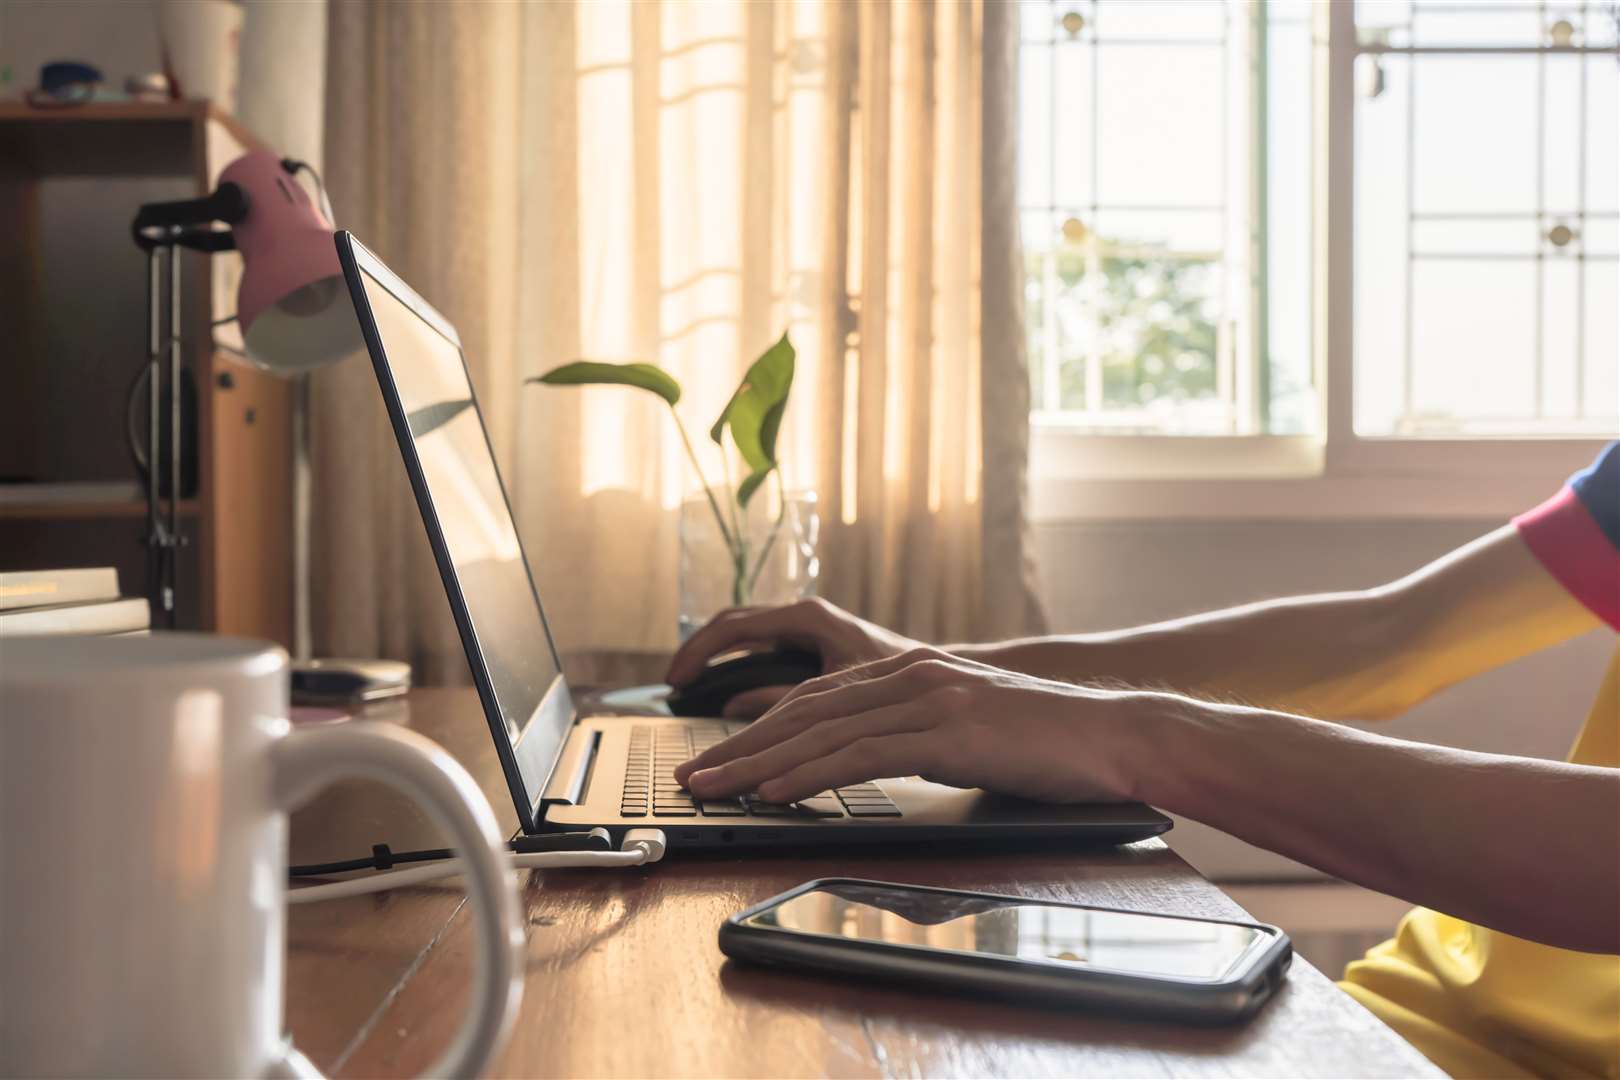 There are pros and cons to working from home – although it’s not an option for everyone.